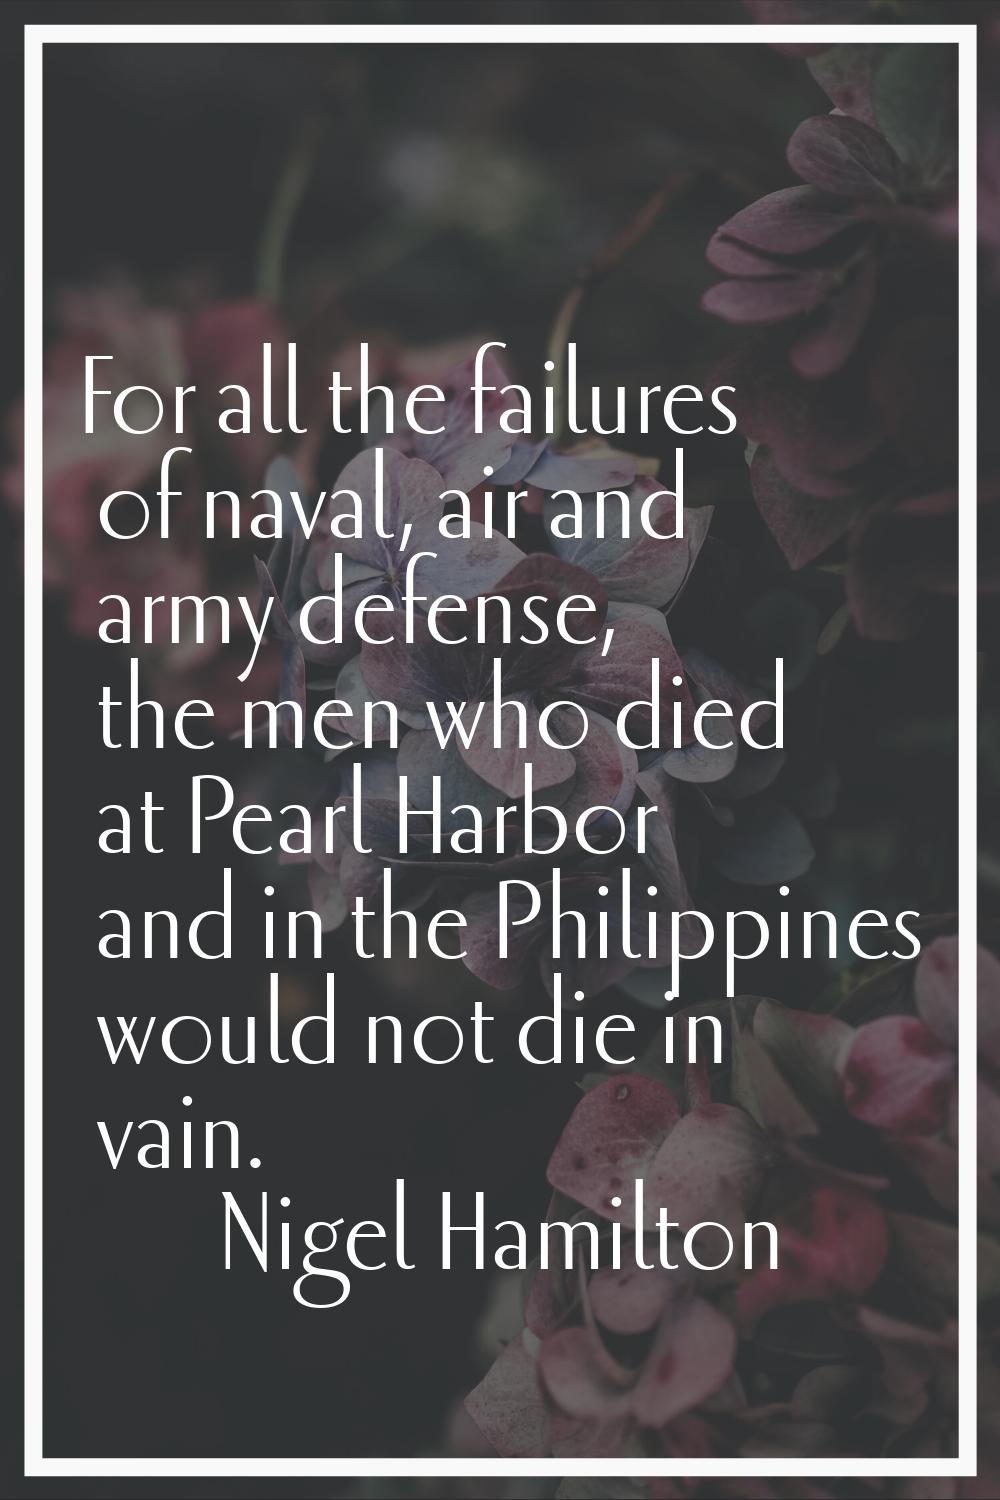 For all the failures of naval, air and army defense, the men who died at Pearl Harbor and in the Ph